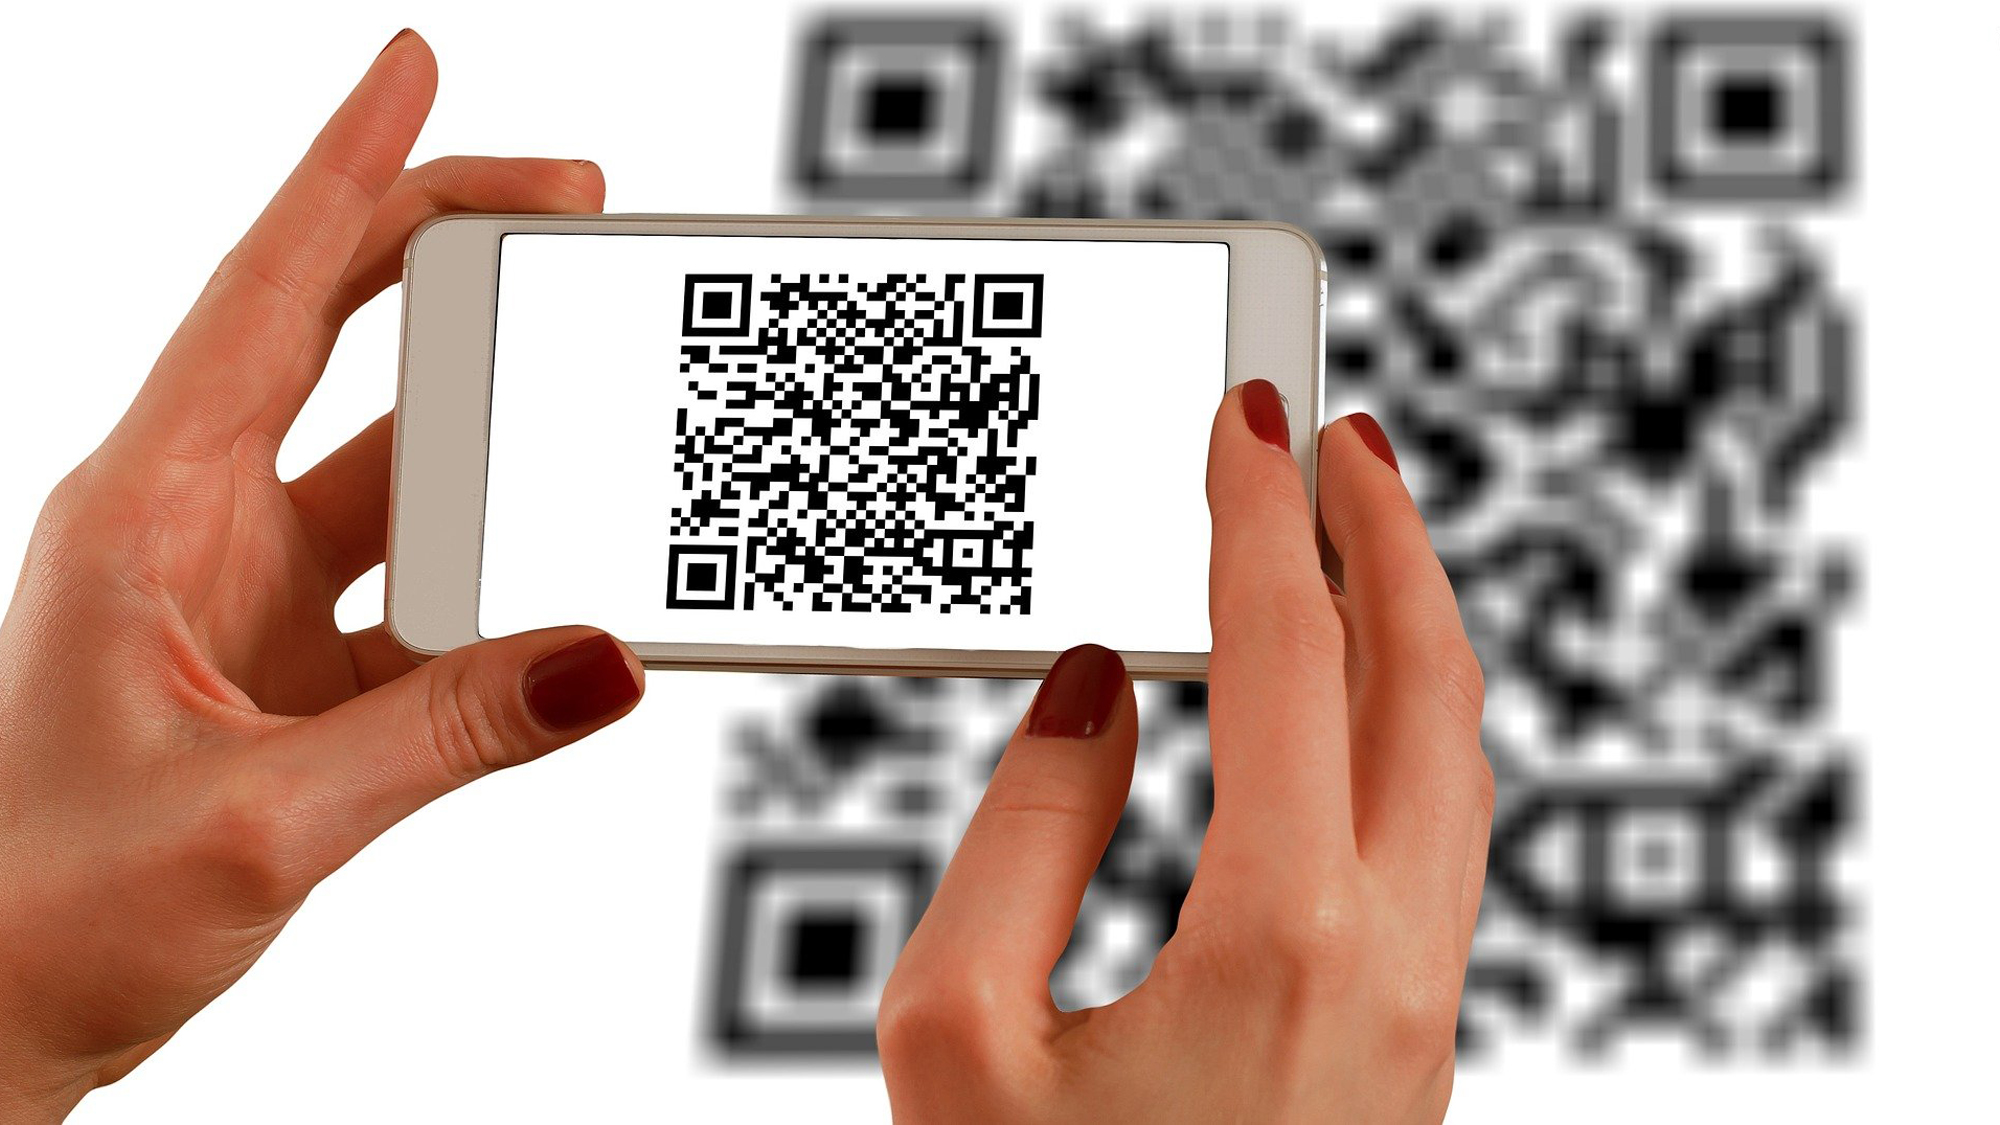 Unleashing the Power of QR Codes: The Benefits of Scanning QR Codes in Everyday Life